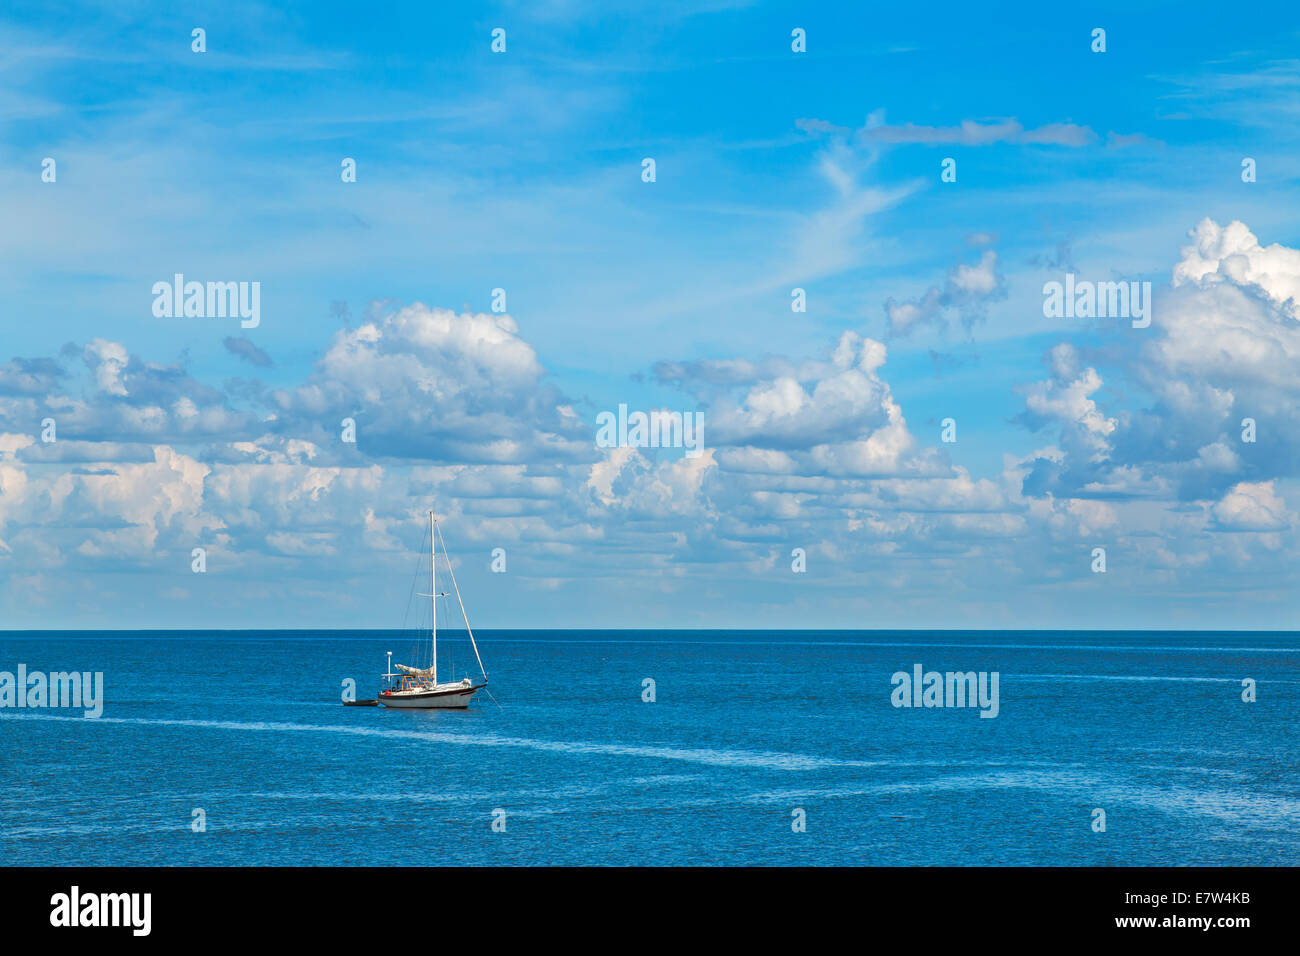 Isolated sailboat on blue ocean sea with white fluffy clouds in clear blue sky looking restful relaxing calm isolated secluded p Stock Photo